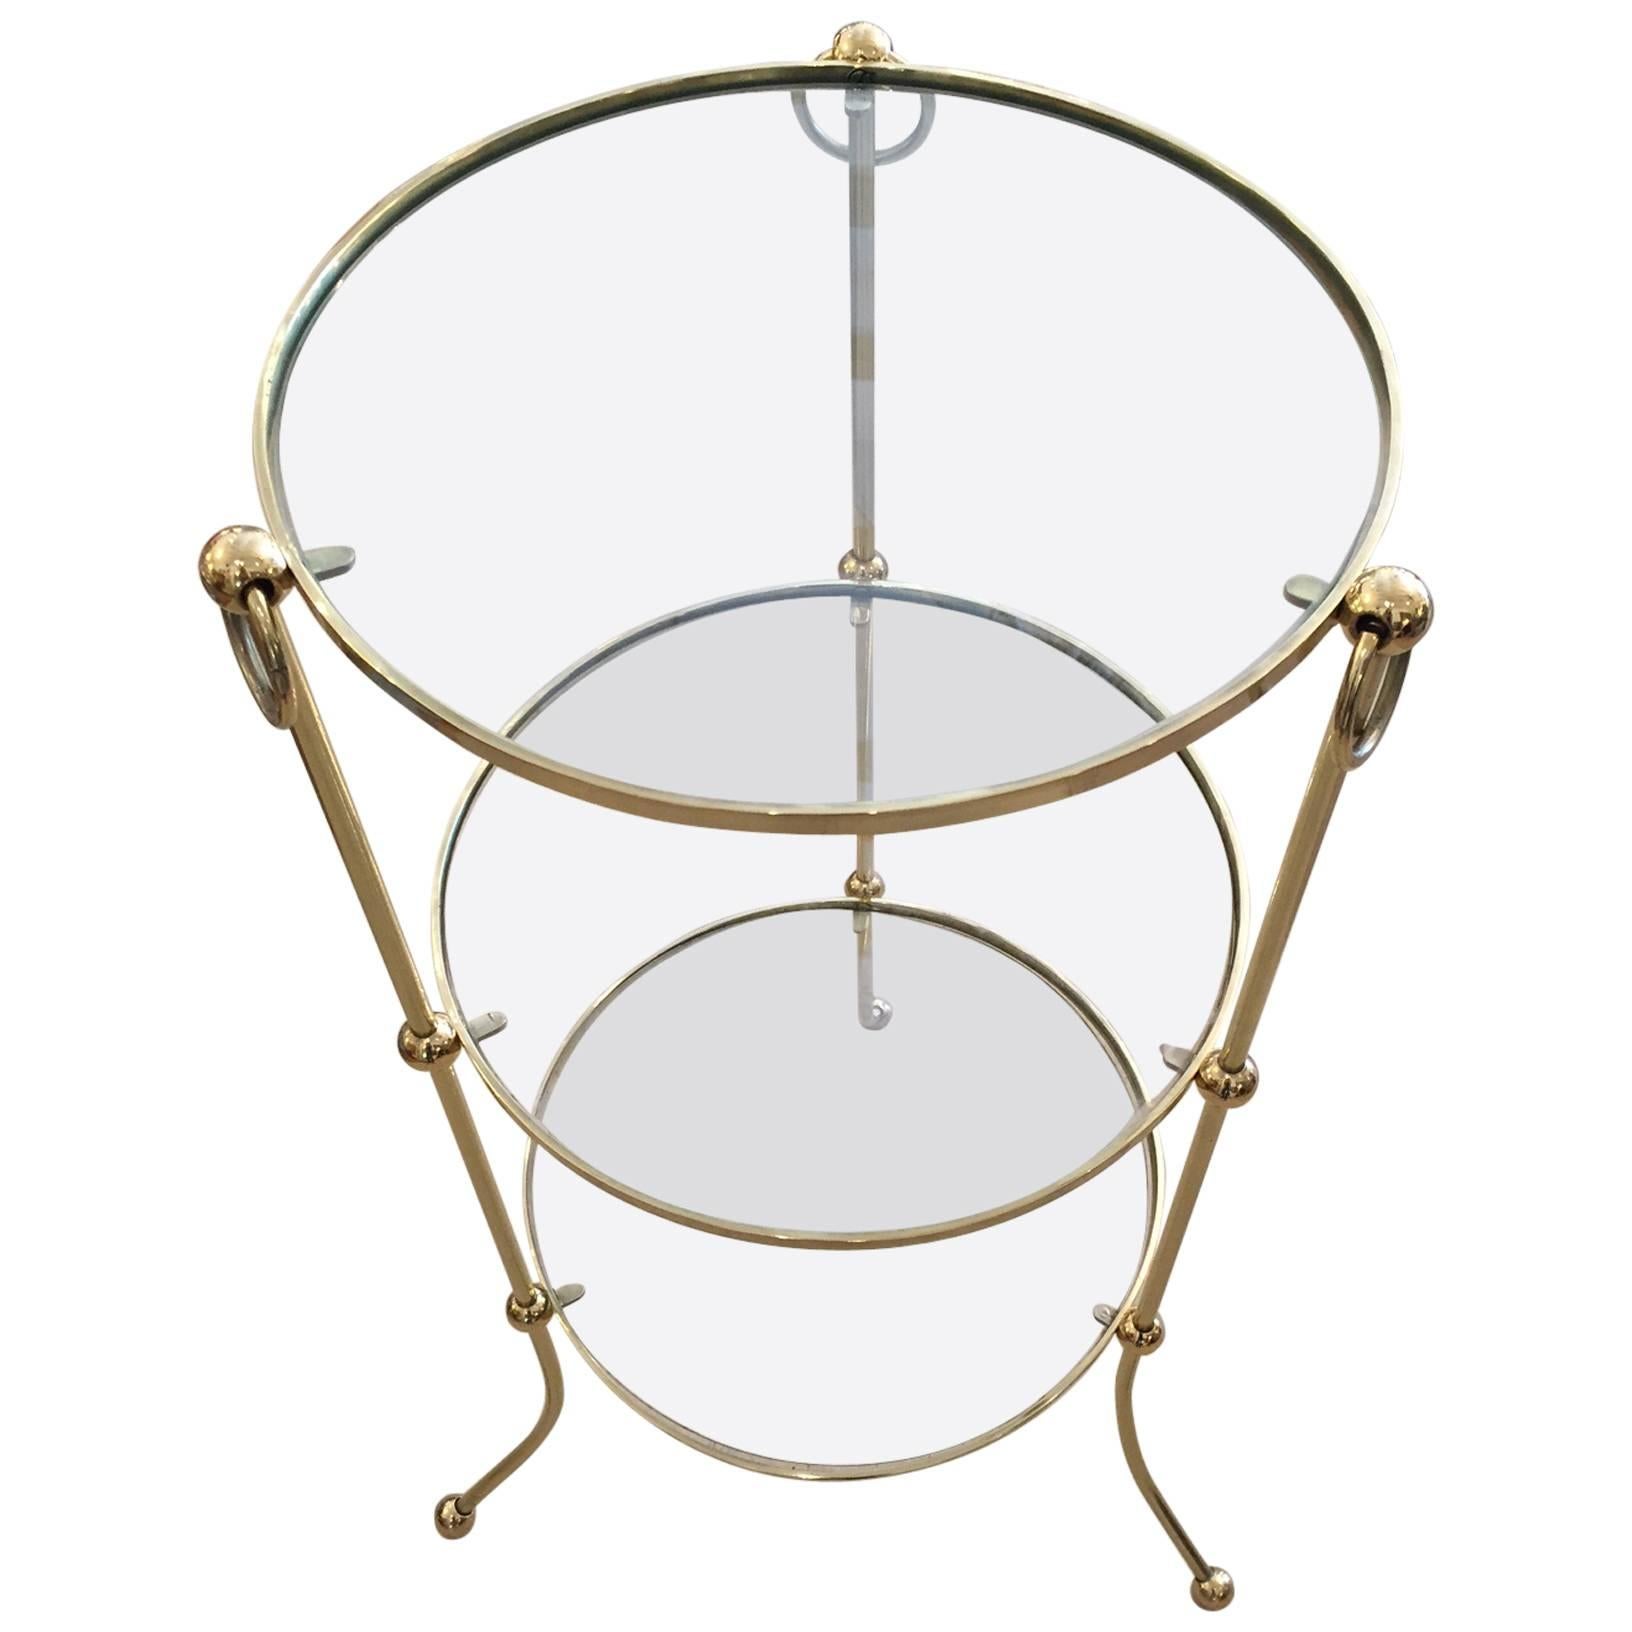 Italian brass circular Campaign style side or drinks table with three tiers for objet d'arte, cocktails, etc. Lovely ball feet and decorative rings.

 